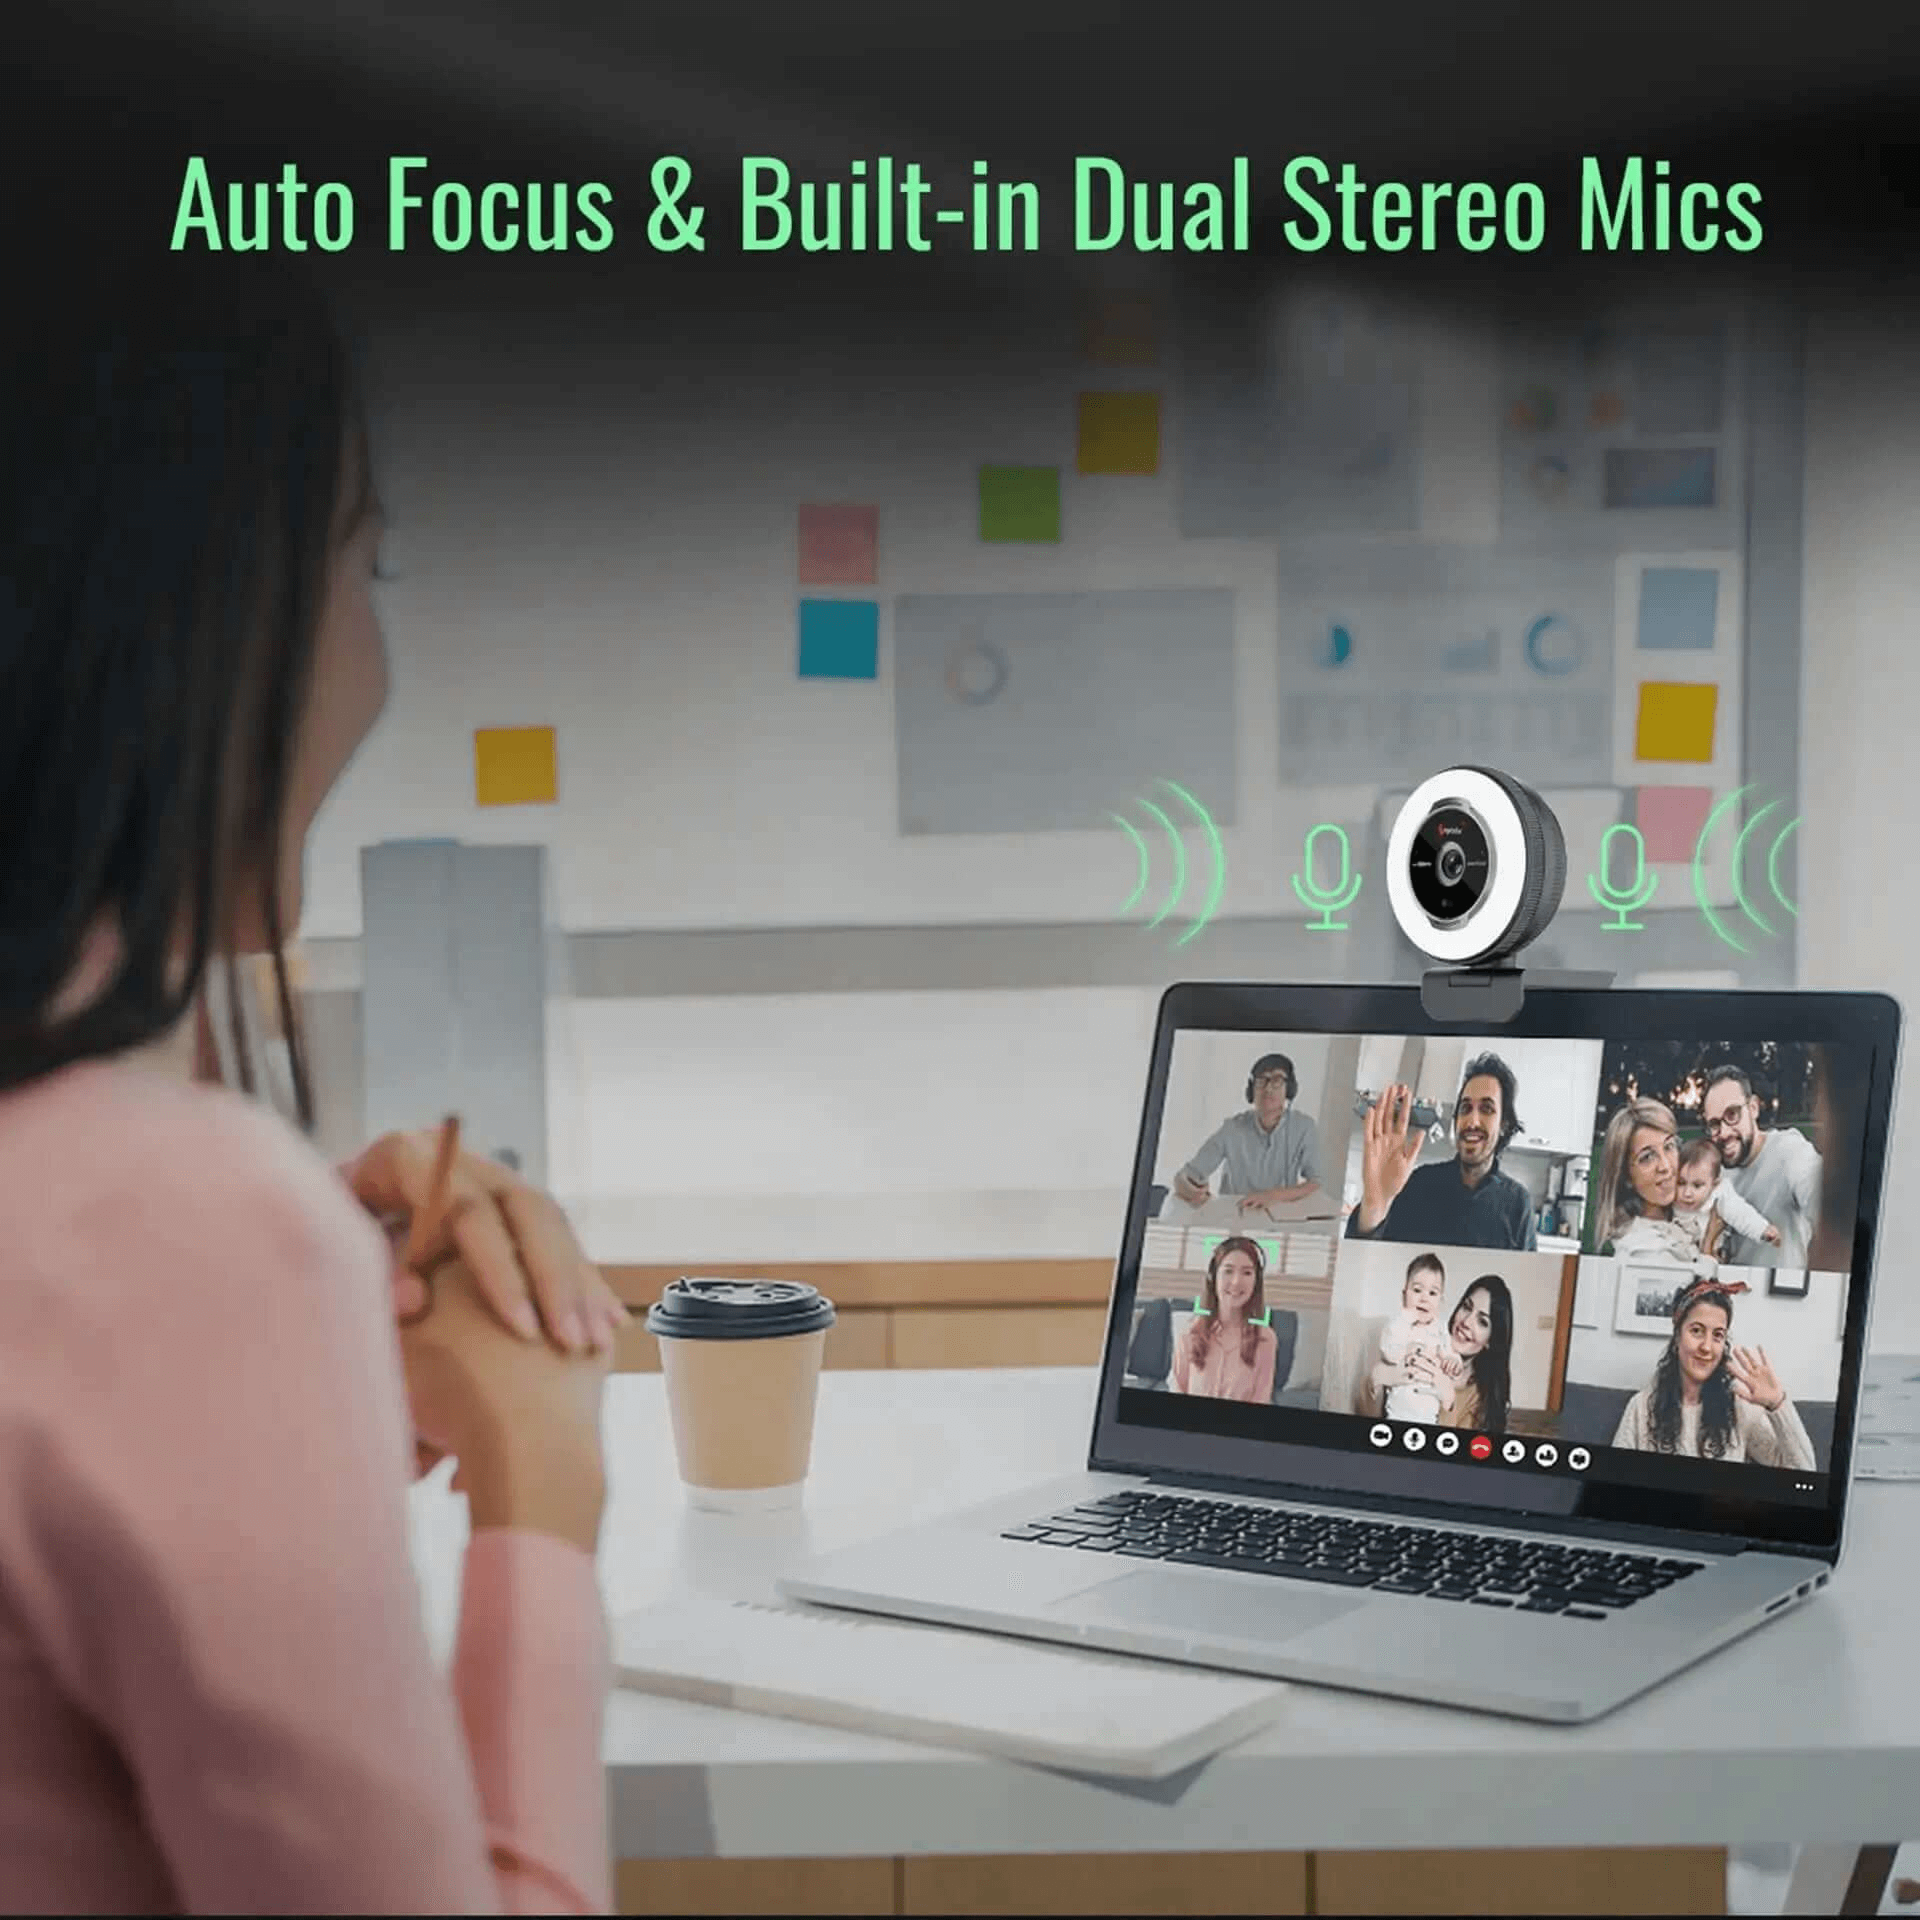 Auto Focus & Built-in Dual Stereo Mics